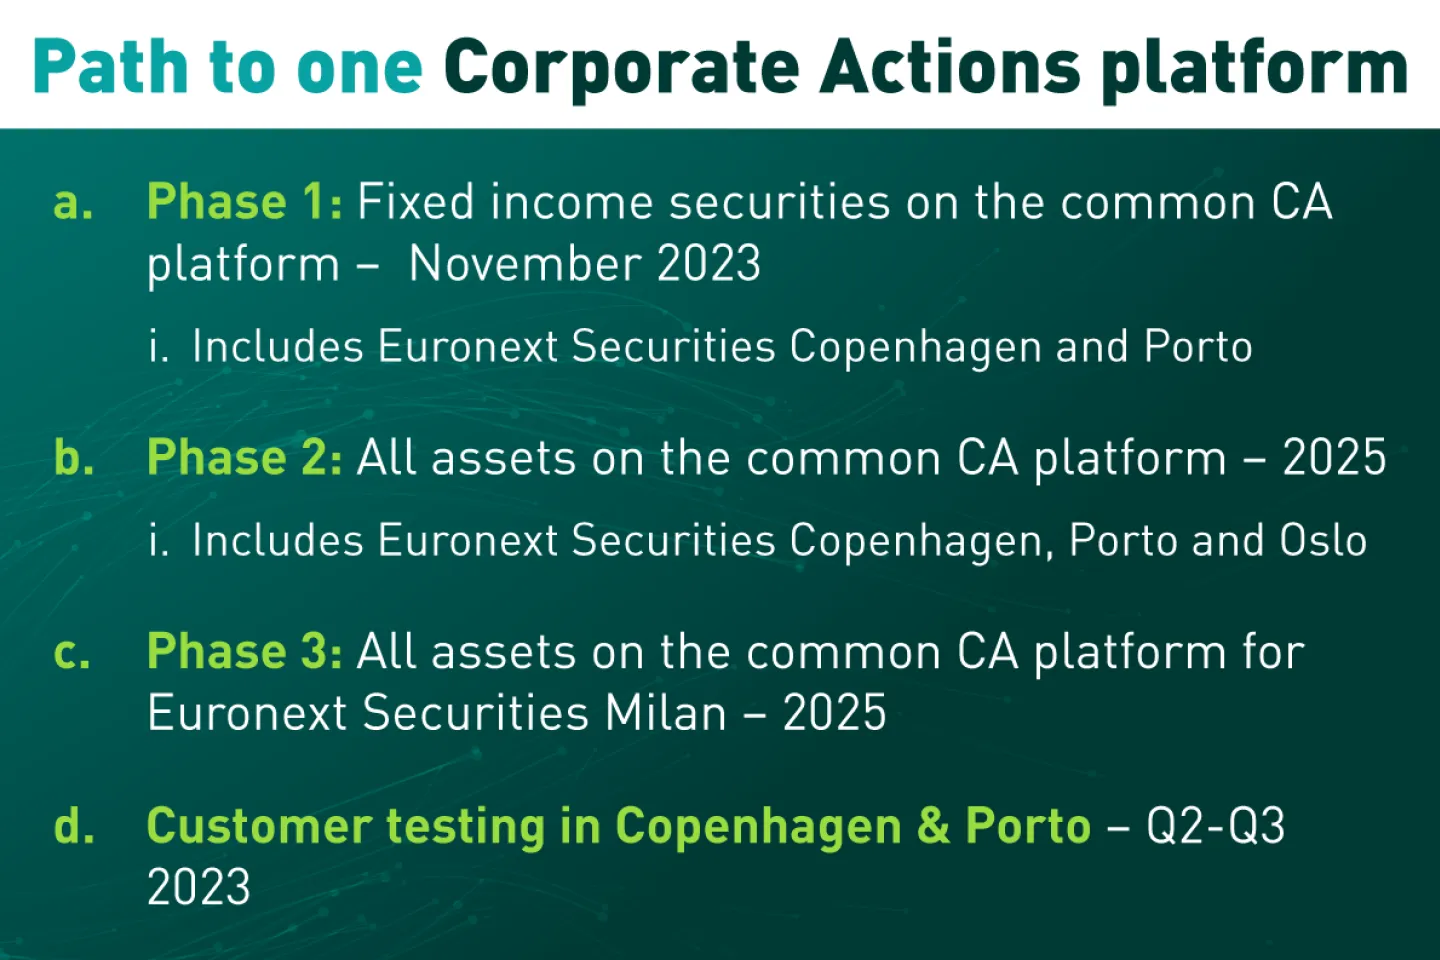 ES-CPH_Article-Corporate-Actions_Banner